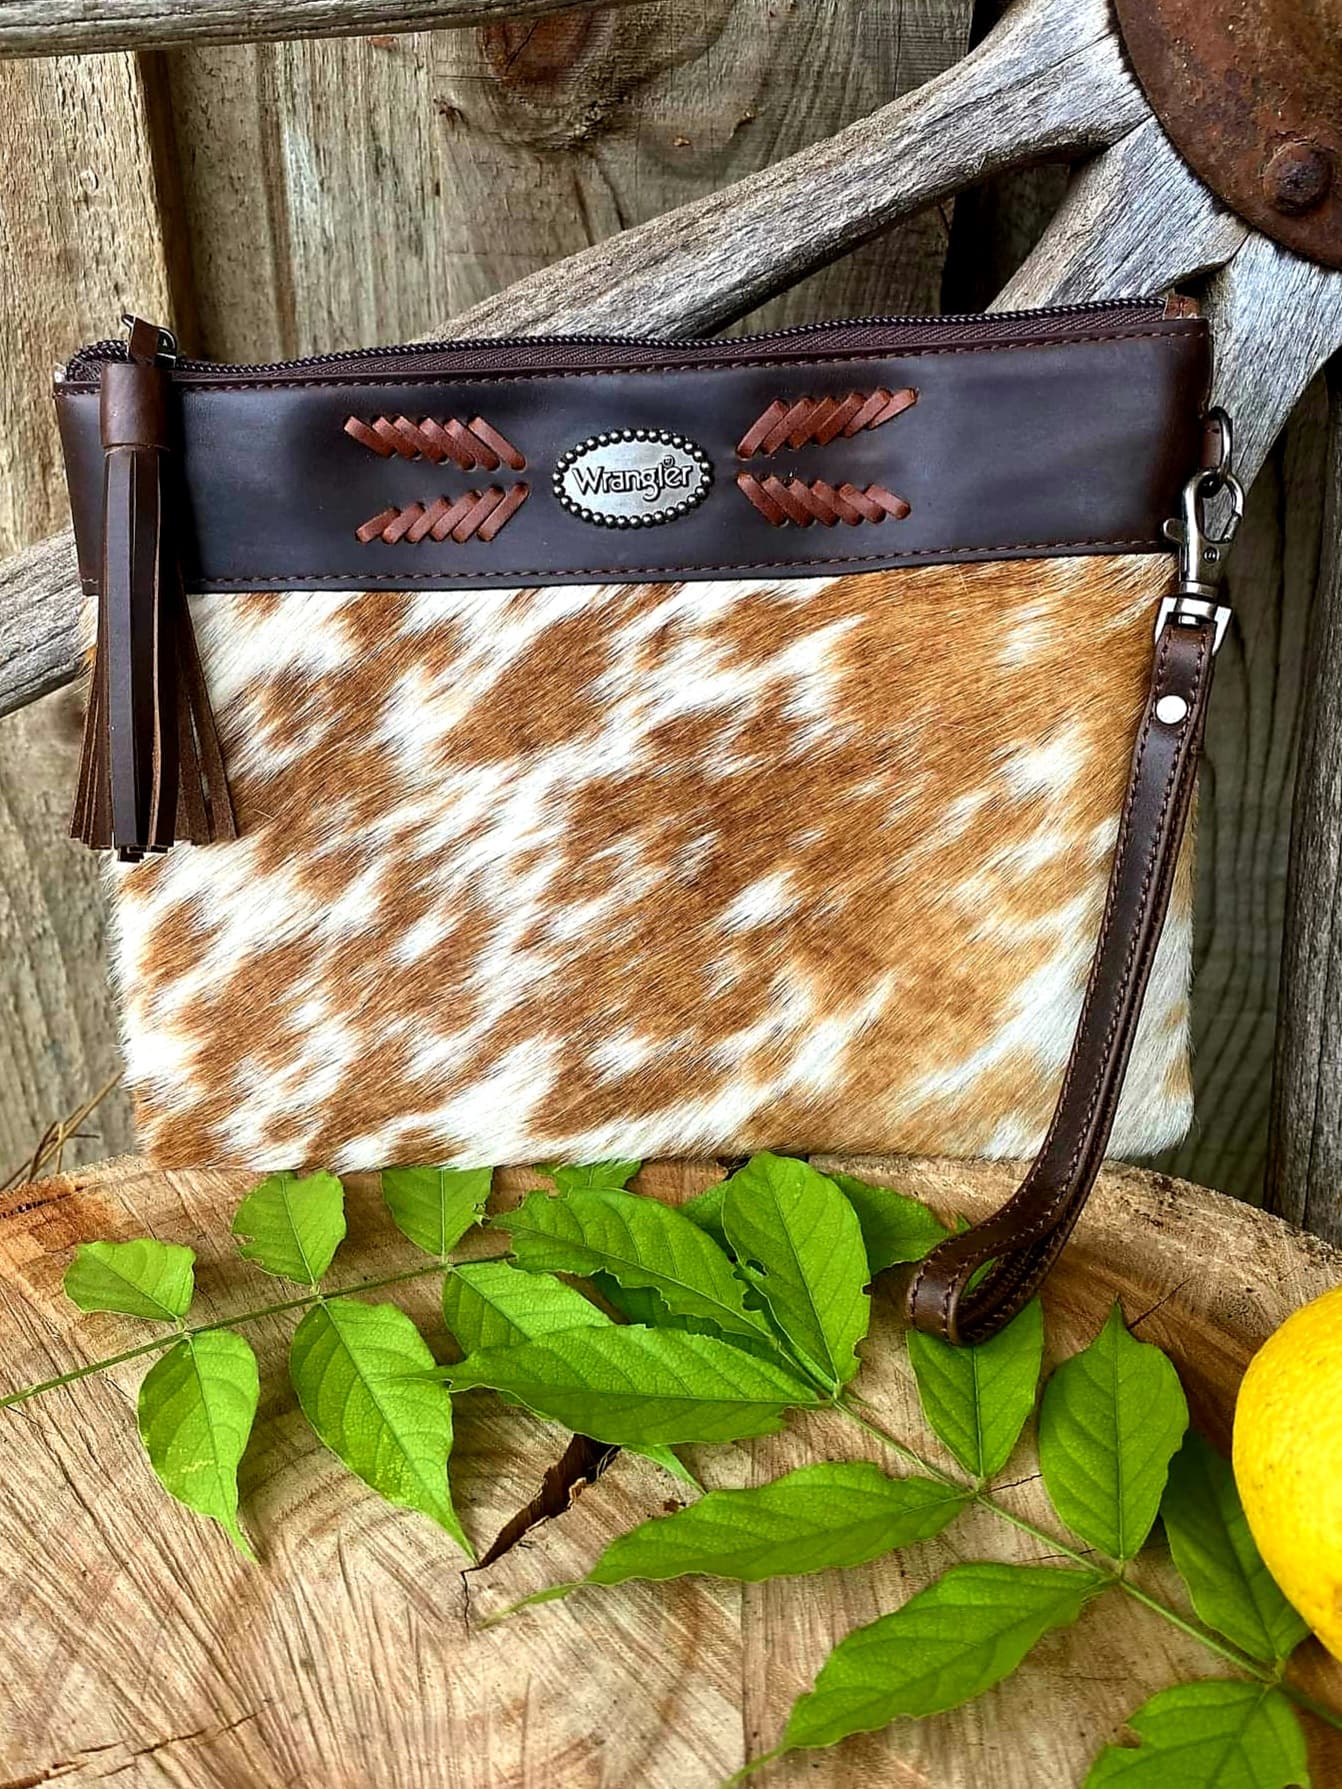 Wrangler  Isabell Genuine  Cowhide  Leather Clutch